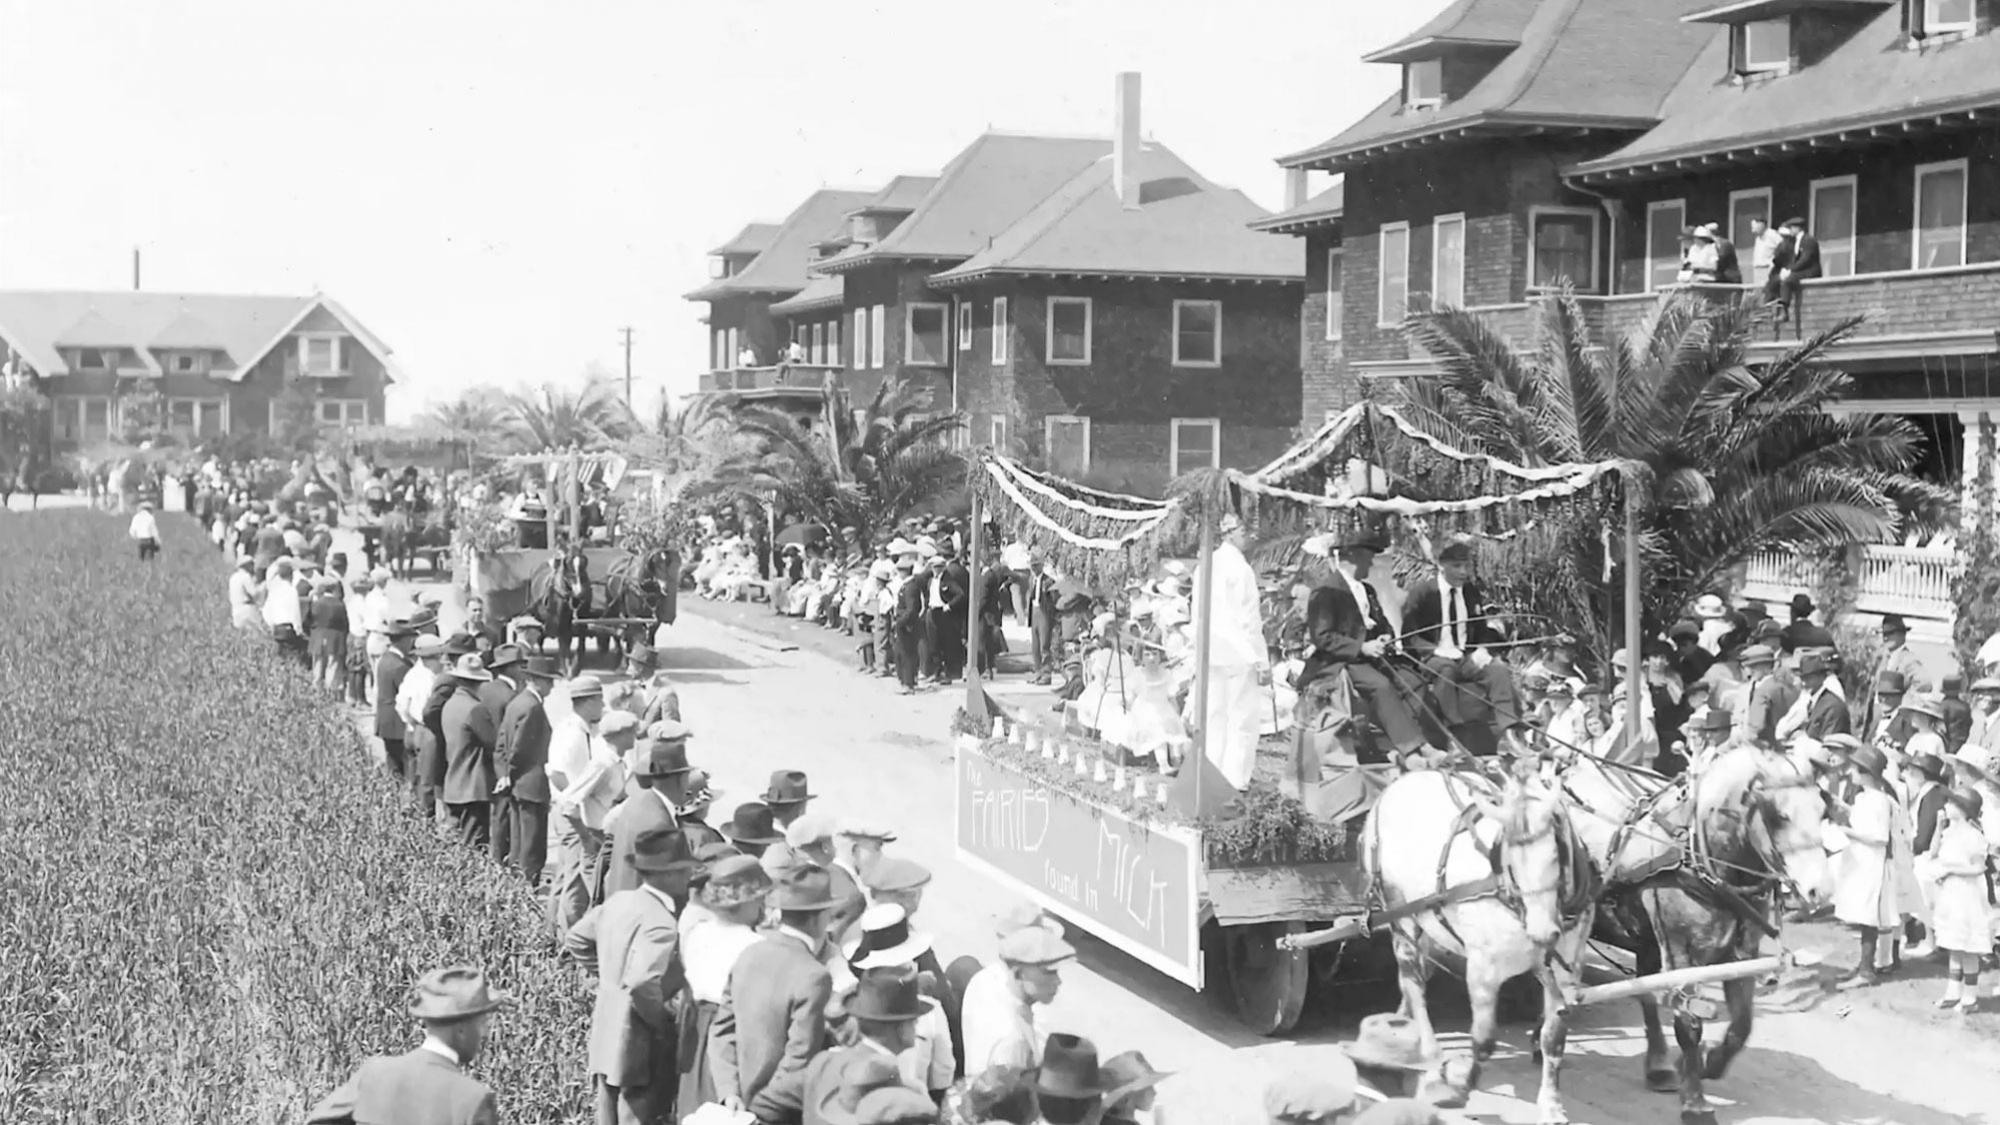 A scene of a ֱ Picnic Day parade circa the turn of the 20th century